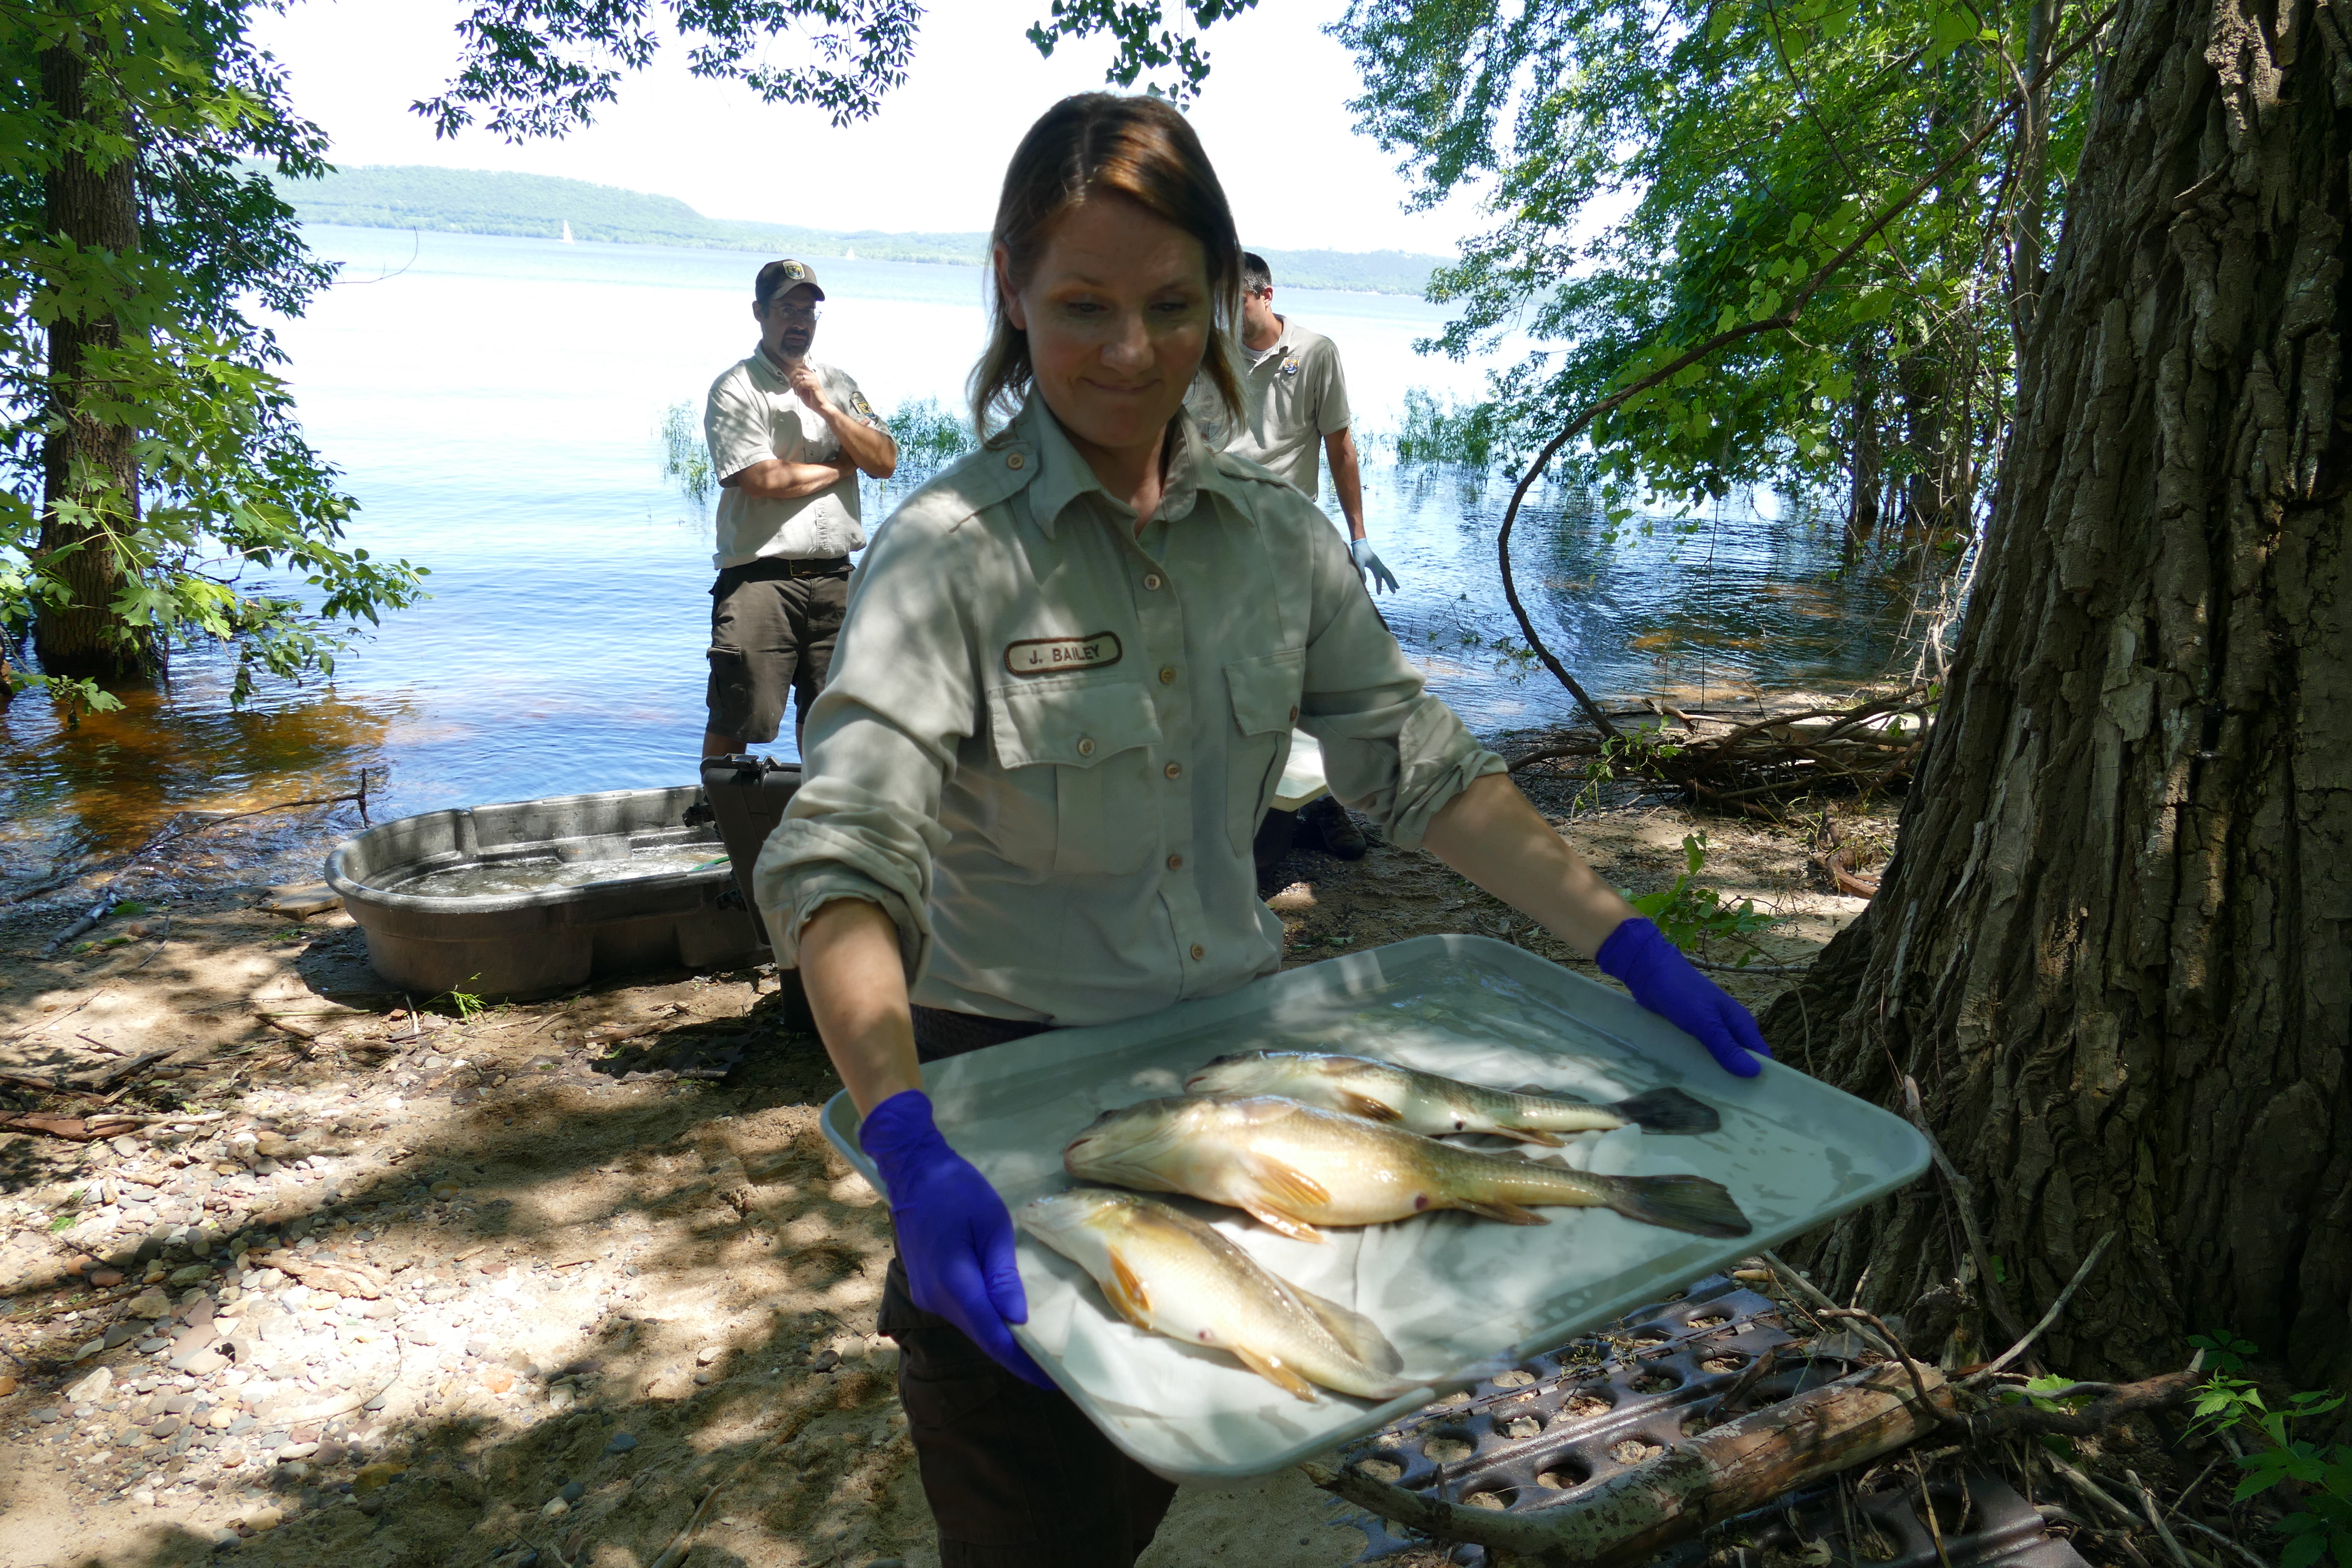 Woman carries tray of fish to perform fish inspection on wild fish by La Crosse Fish Health Center.